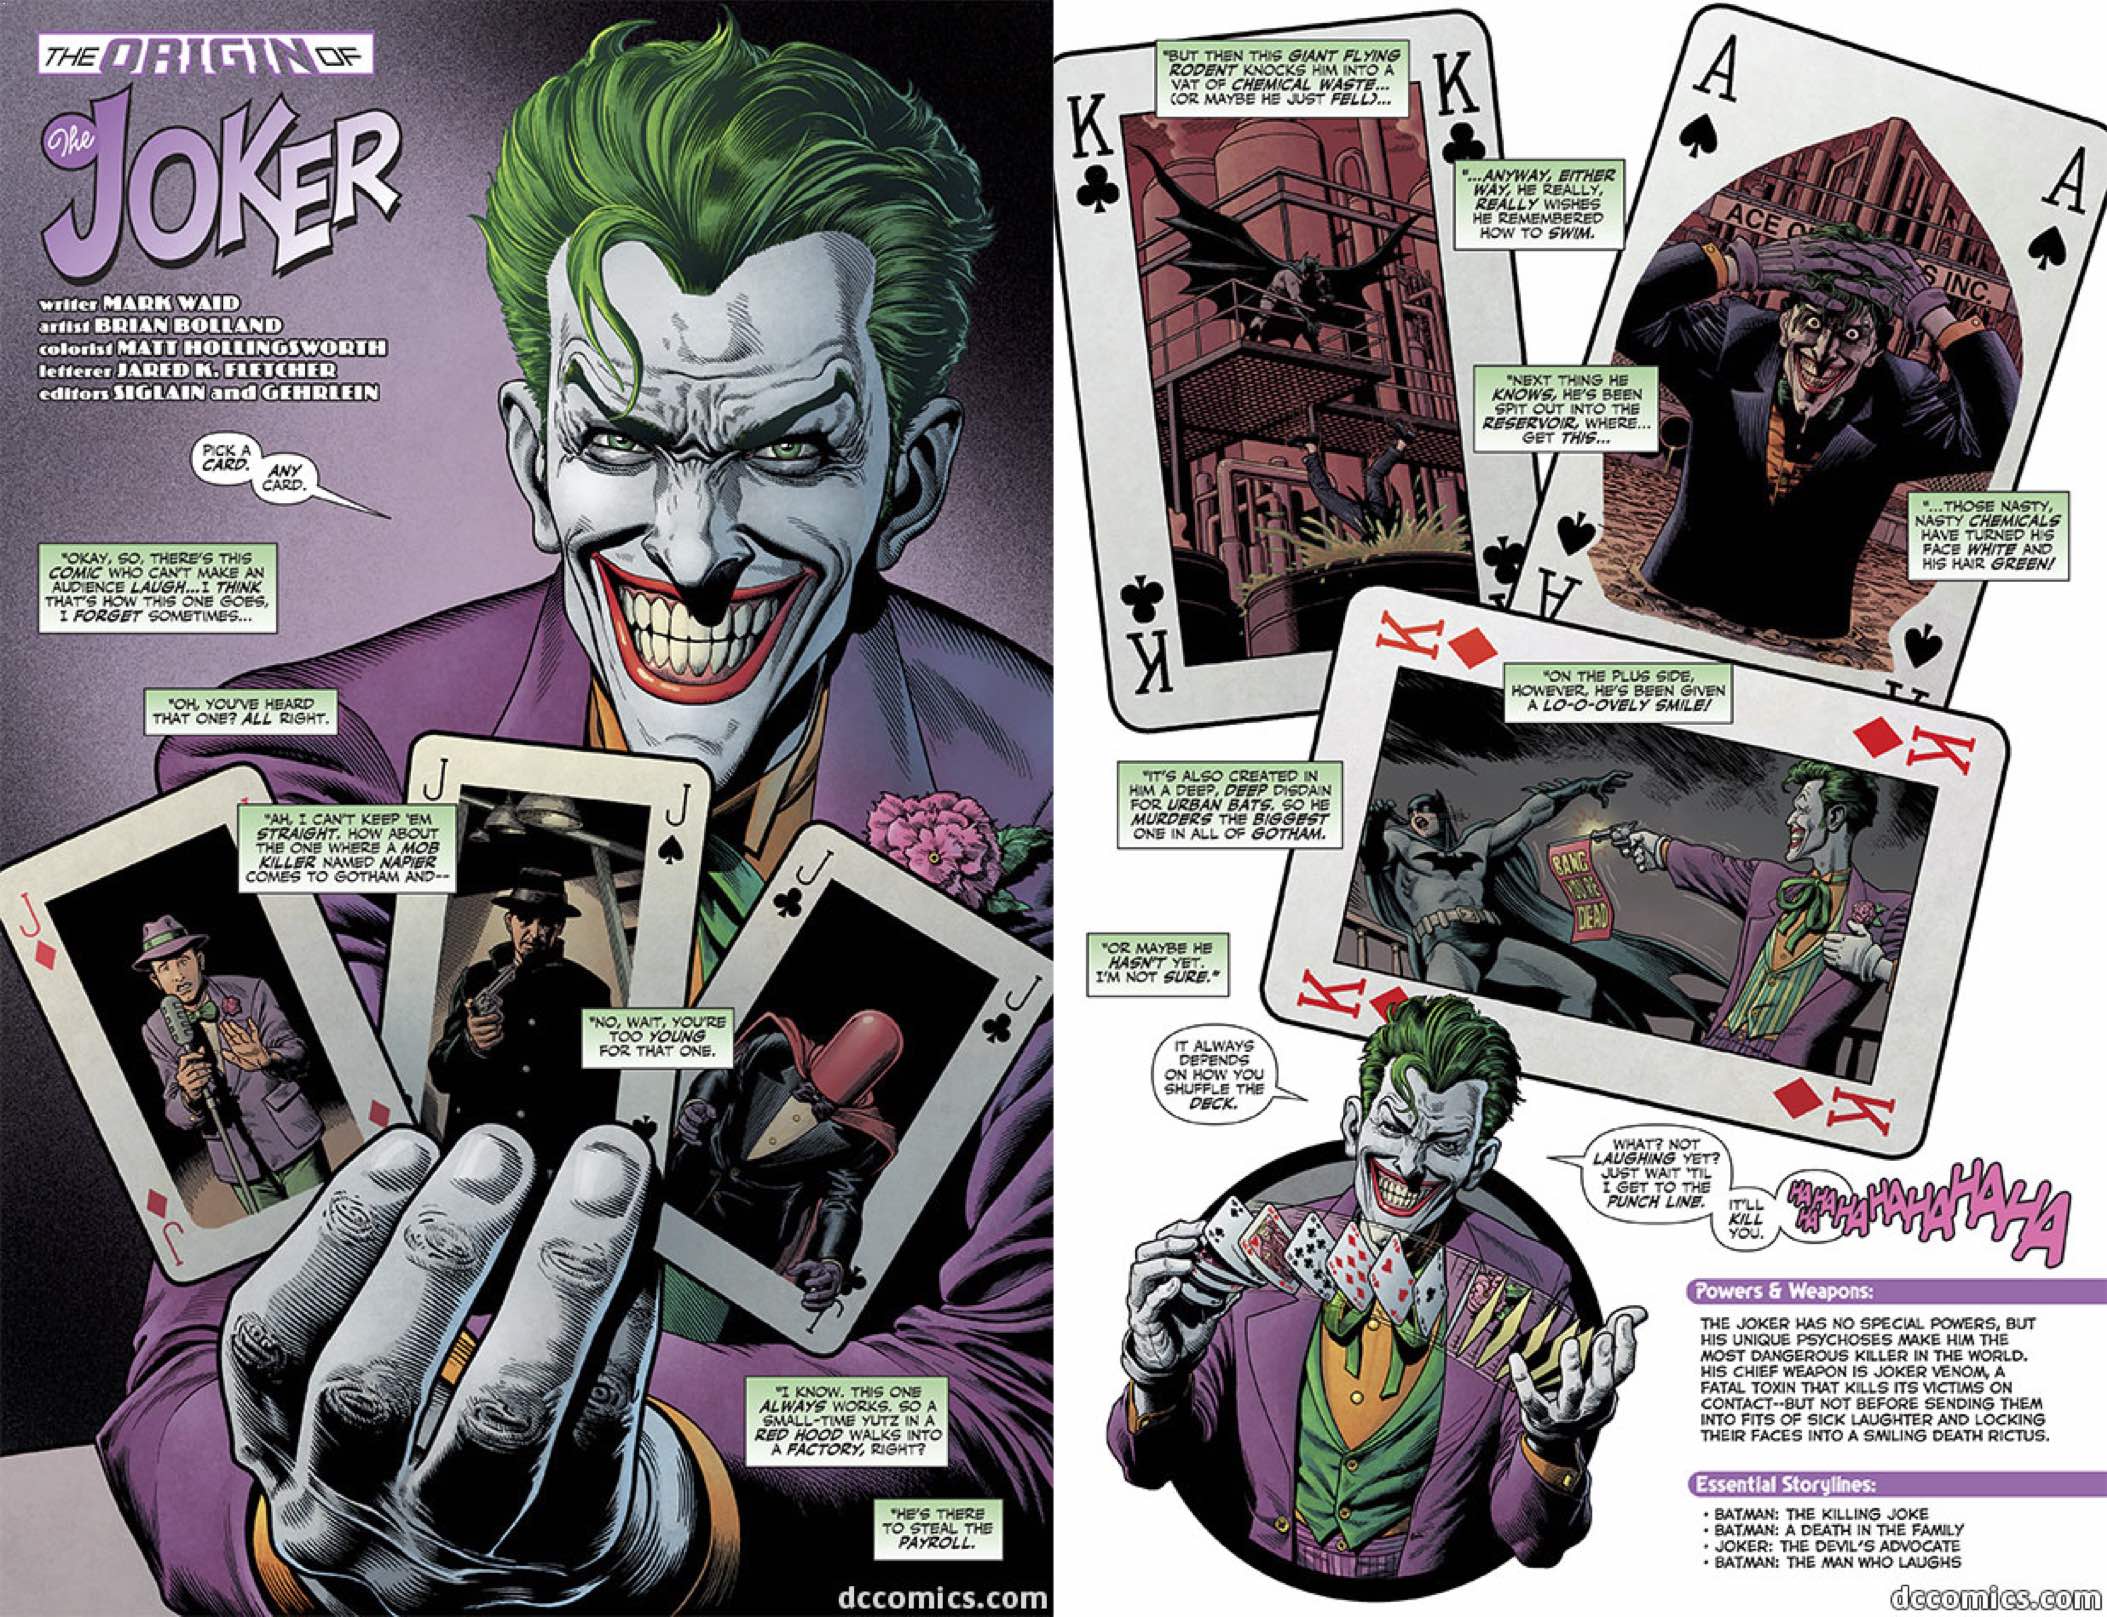 Joker origin story draws out the geek in CNN's Jake Tapper (and us, too ...